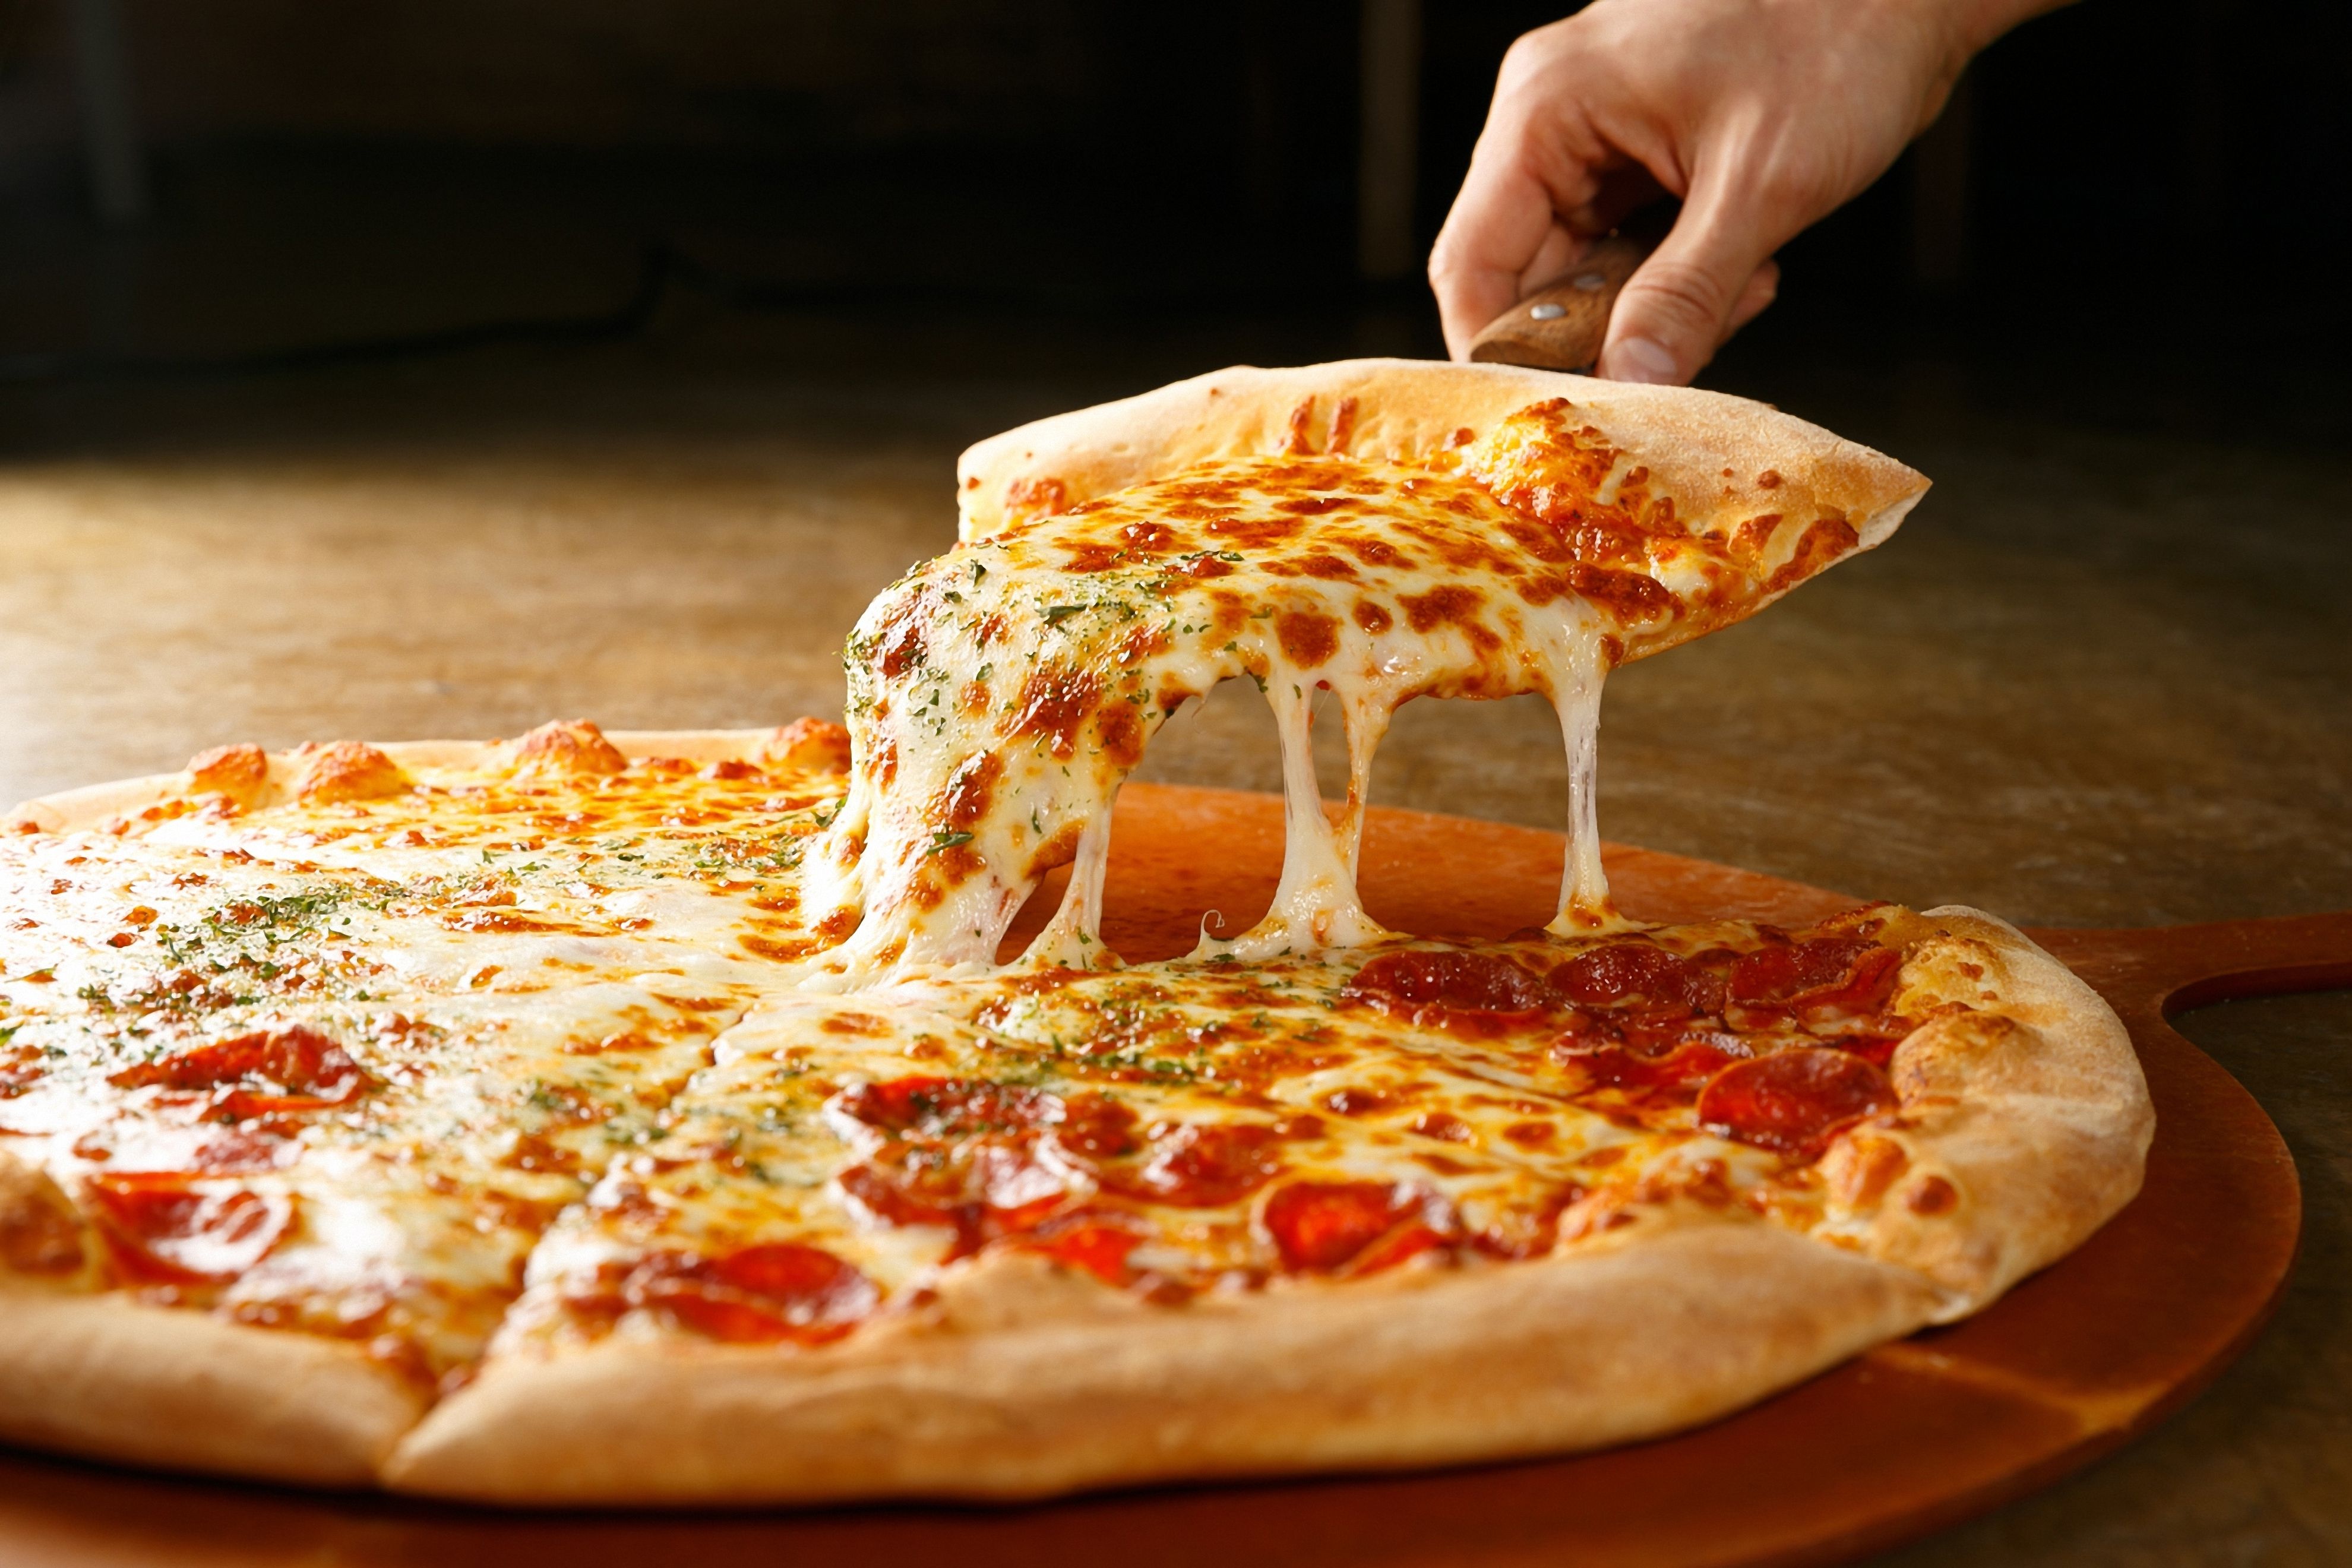 Learn the art of pizza with DeliciousRound: Masterclasses to make the best pizzas!